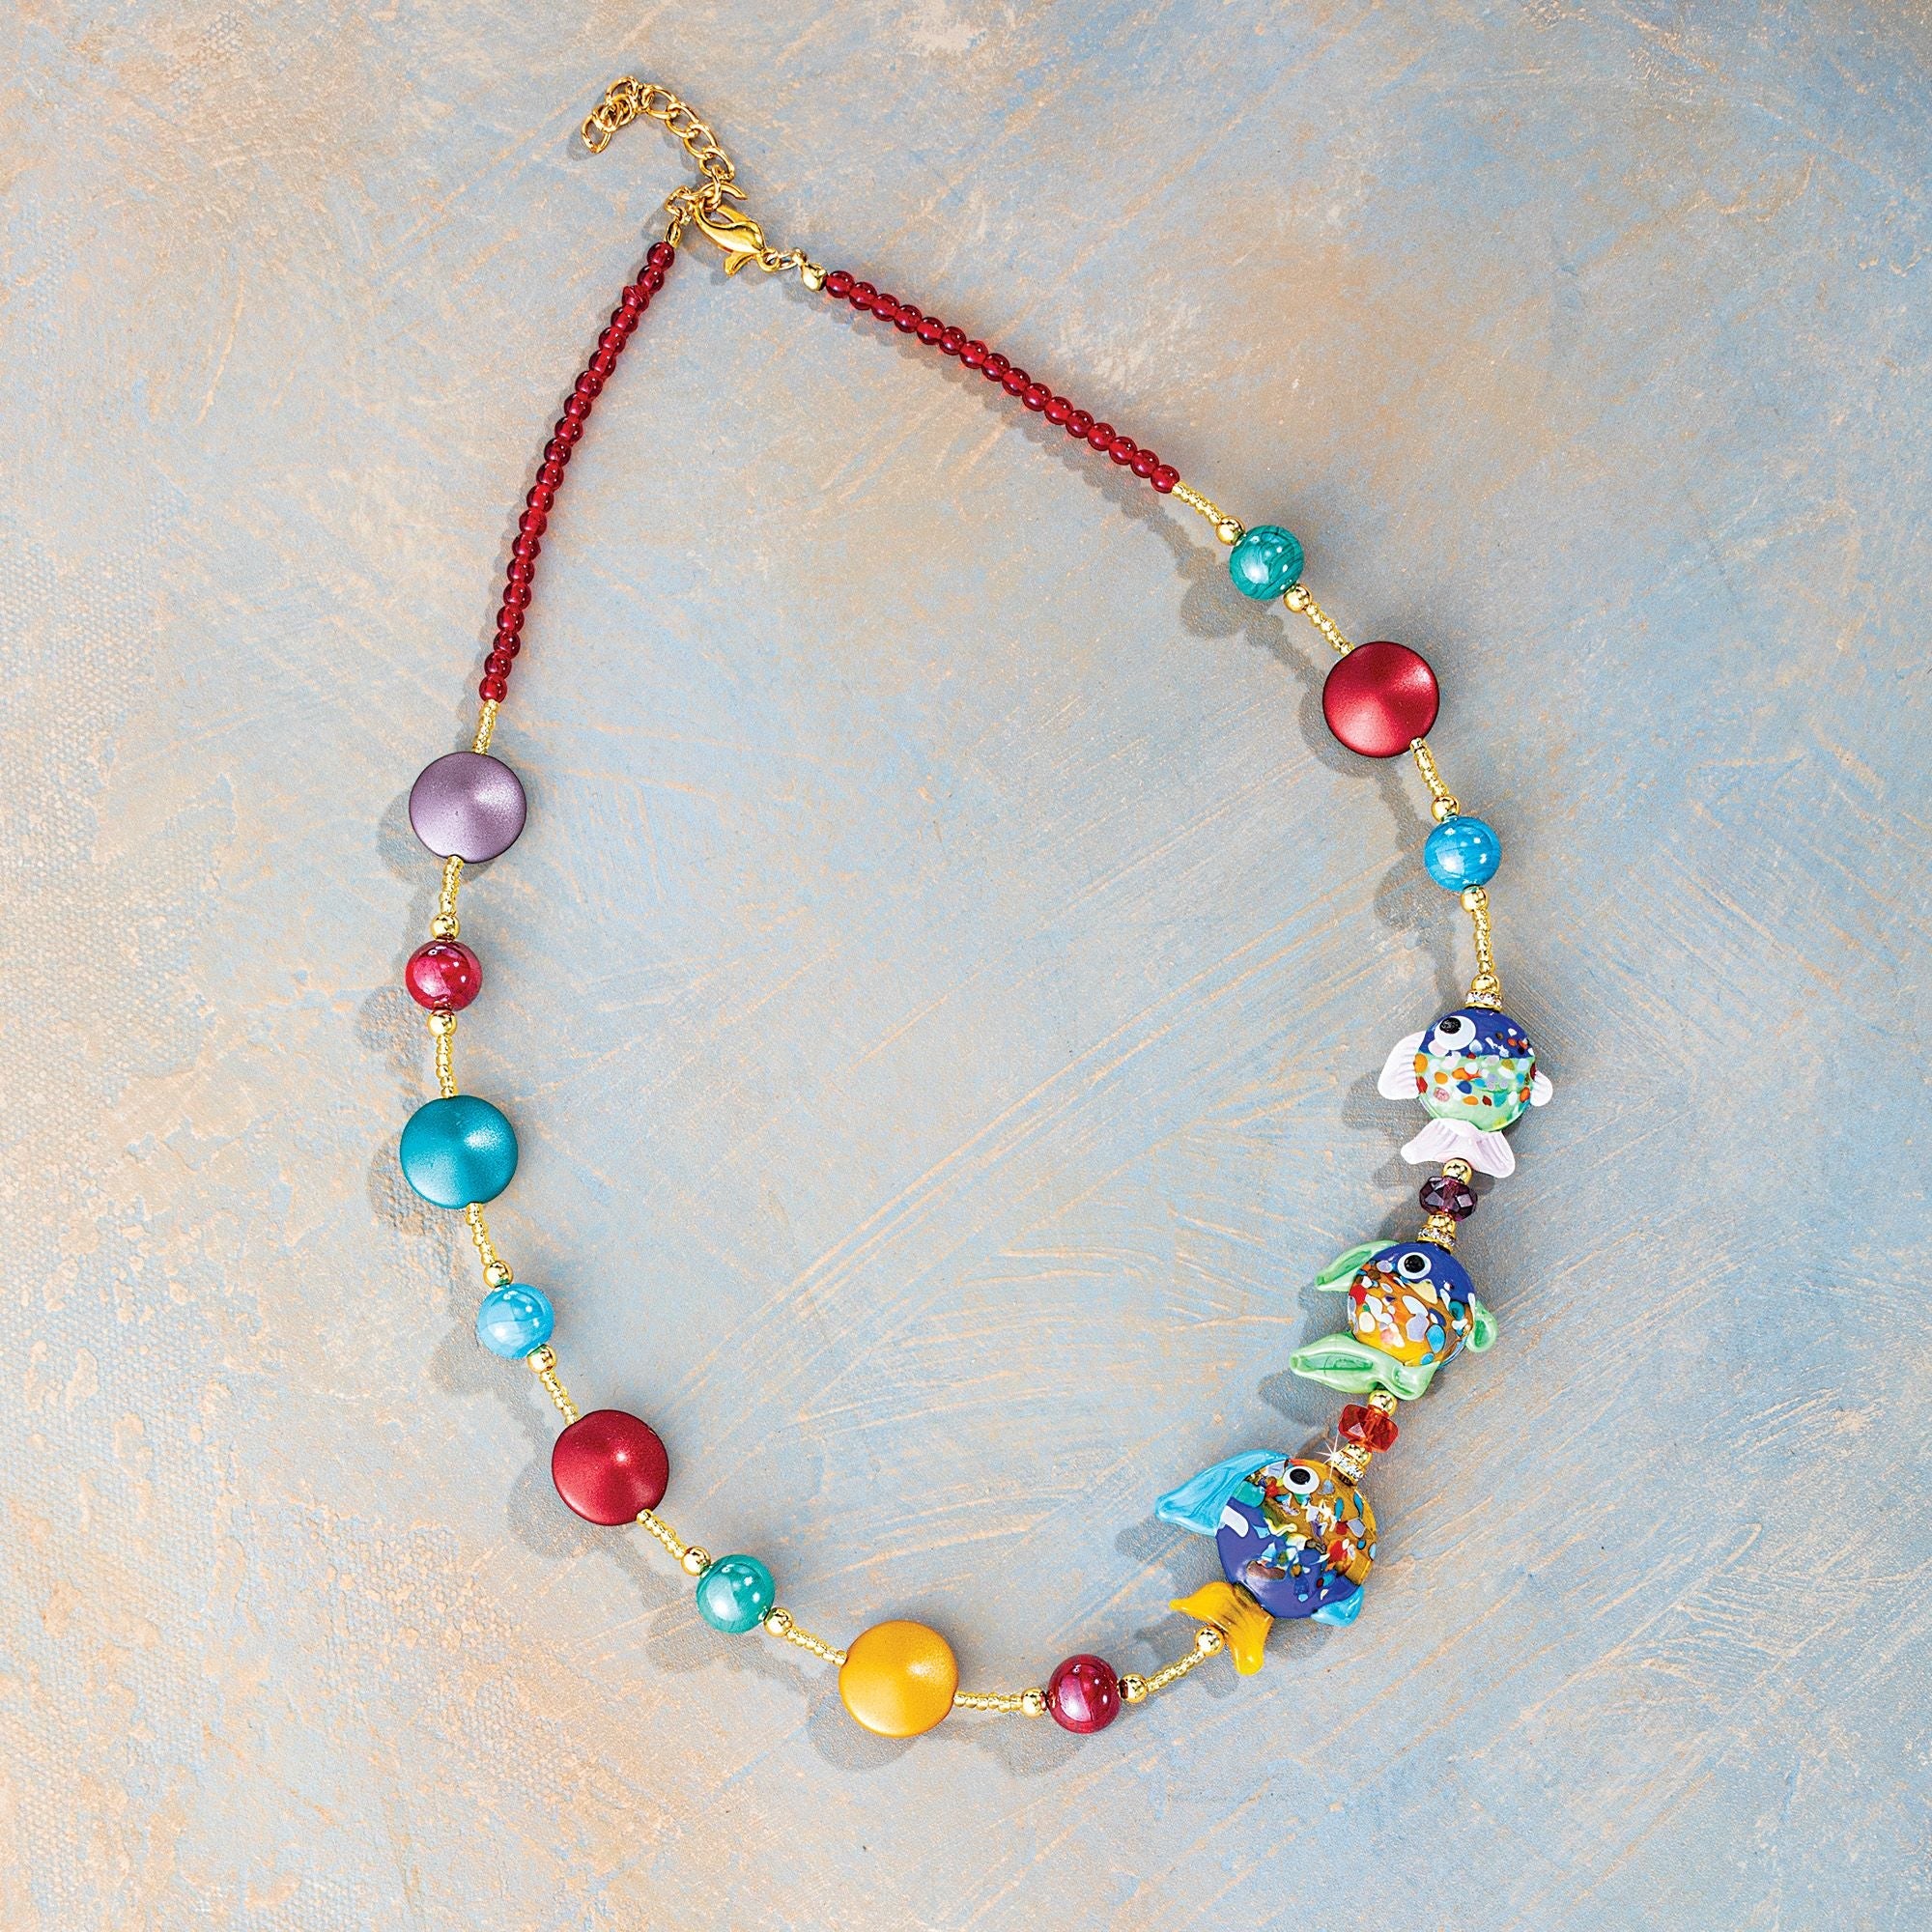 Life Under The Sea Murano Glass Necklace